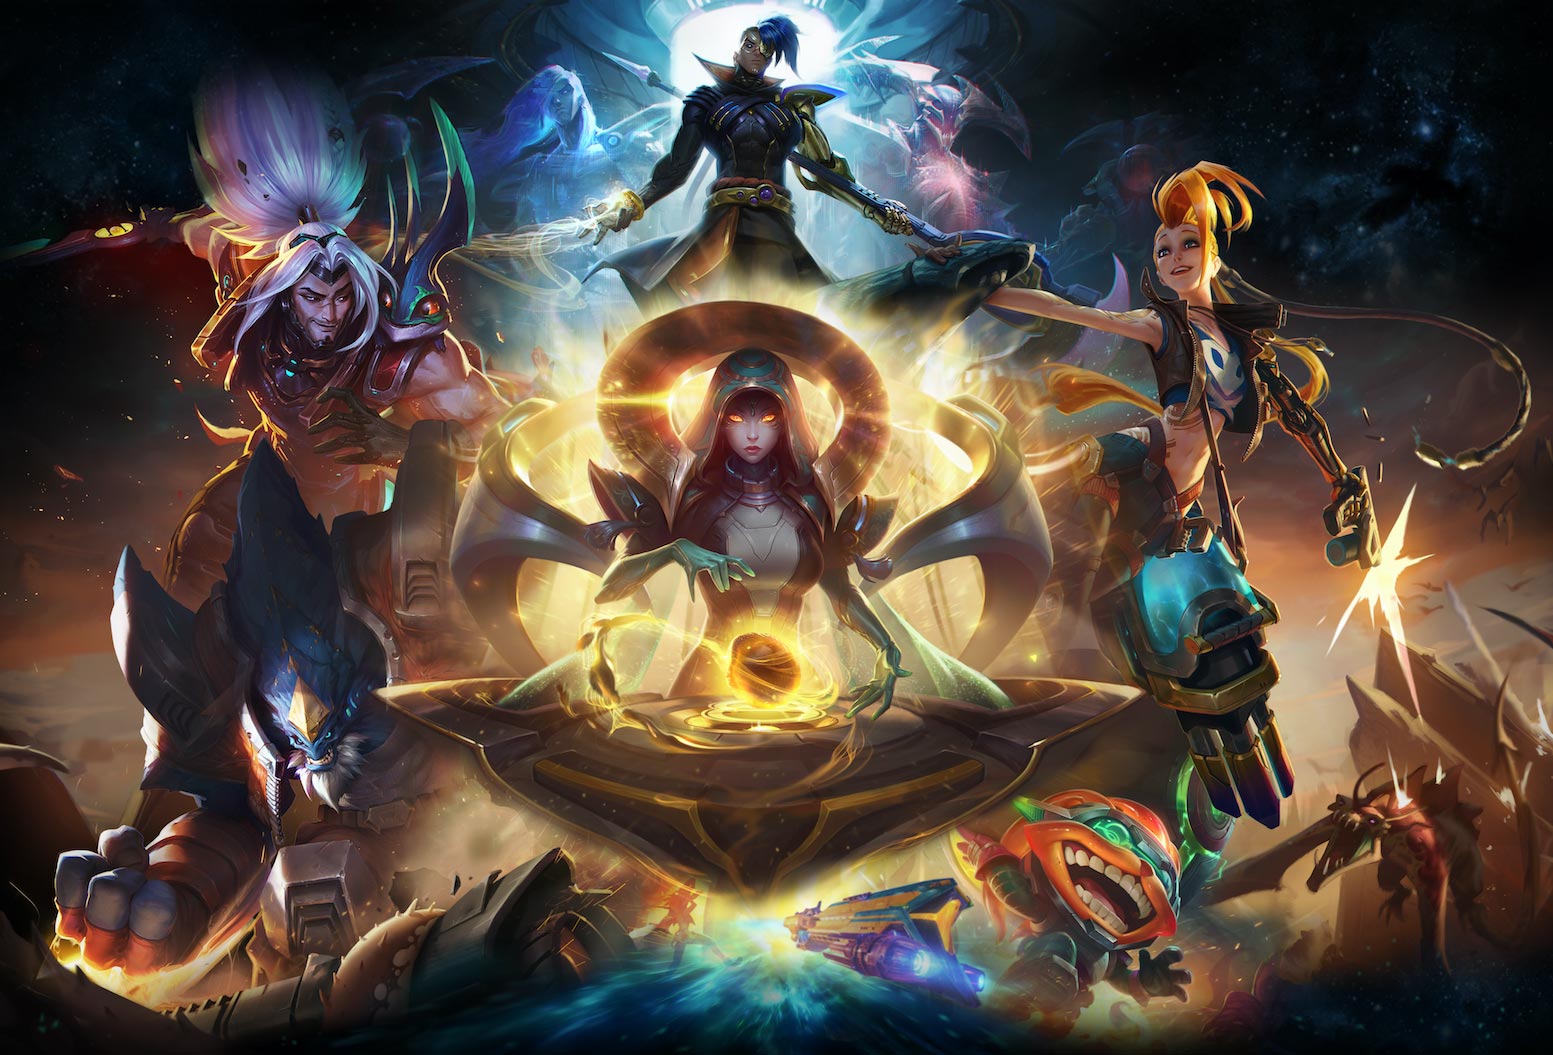 Collection, League of Legends Wiki